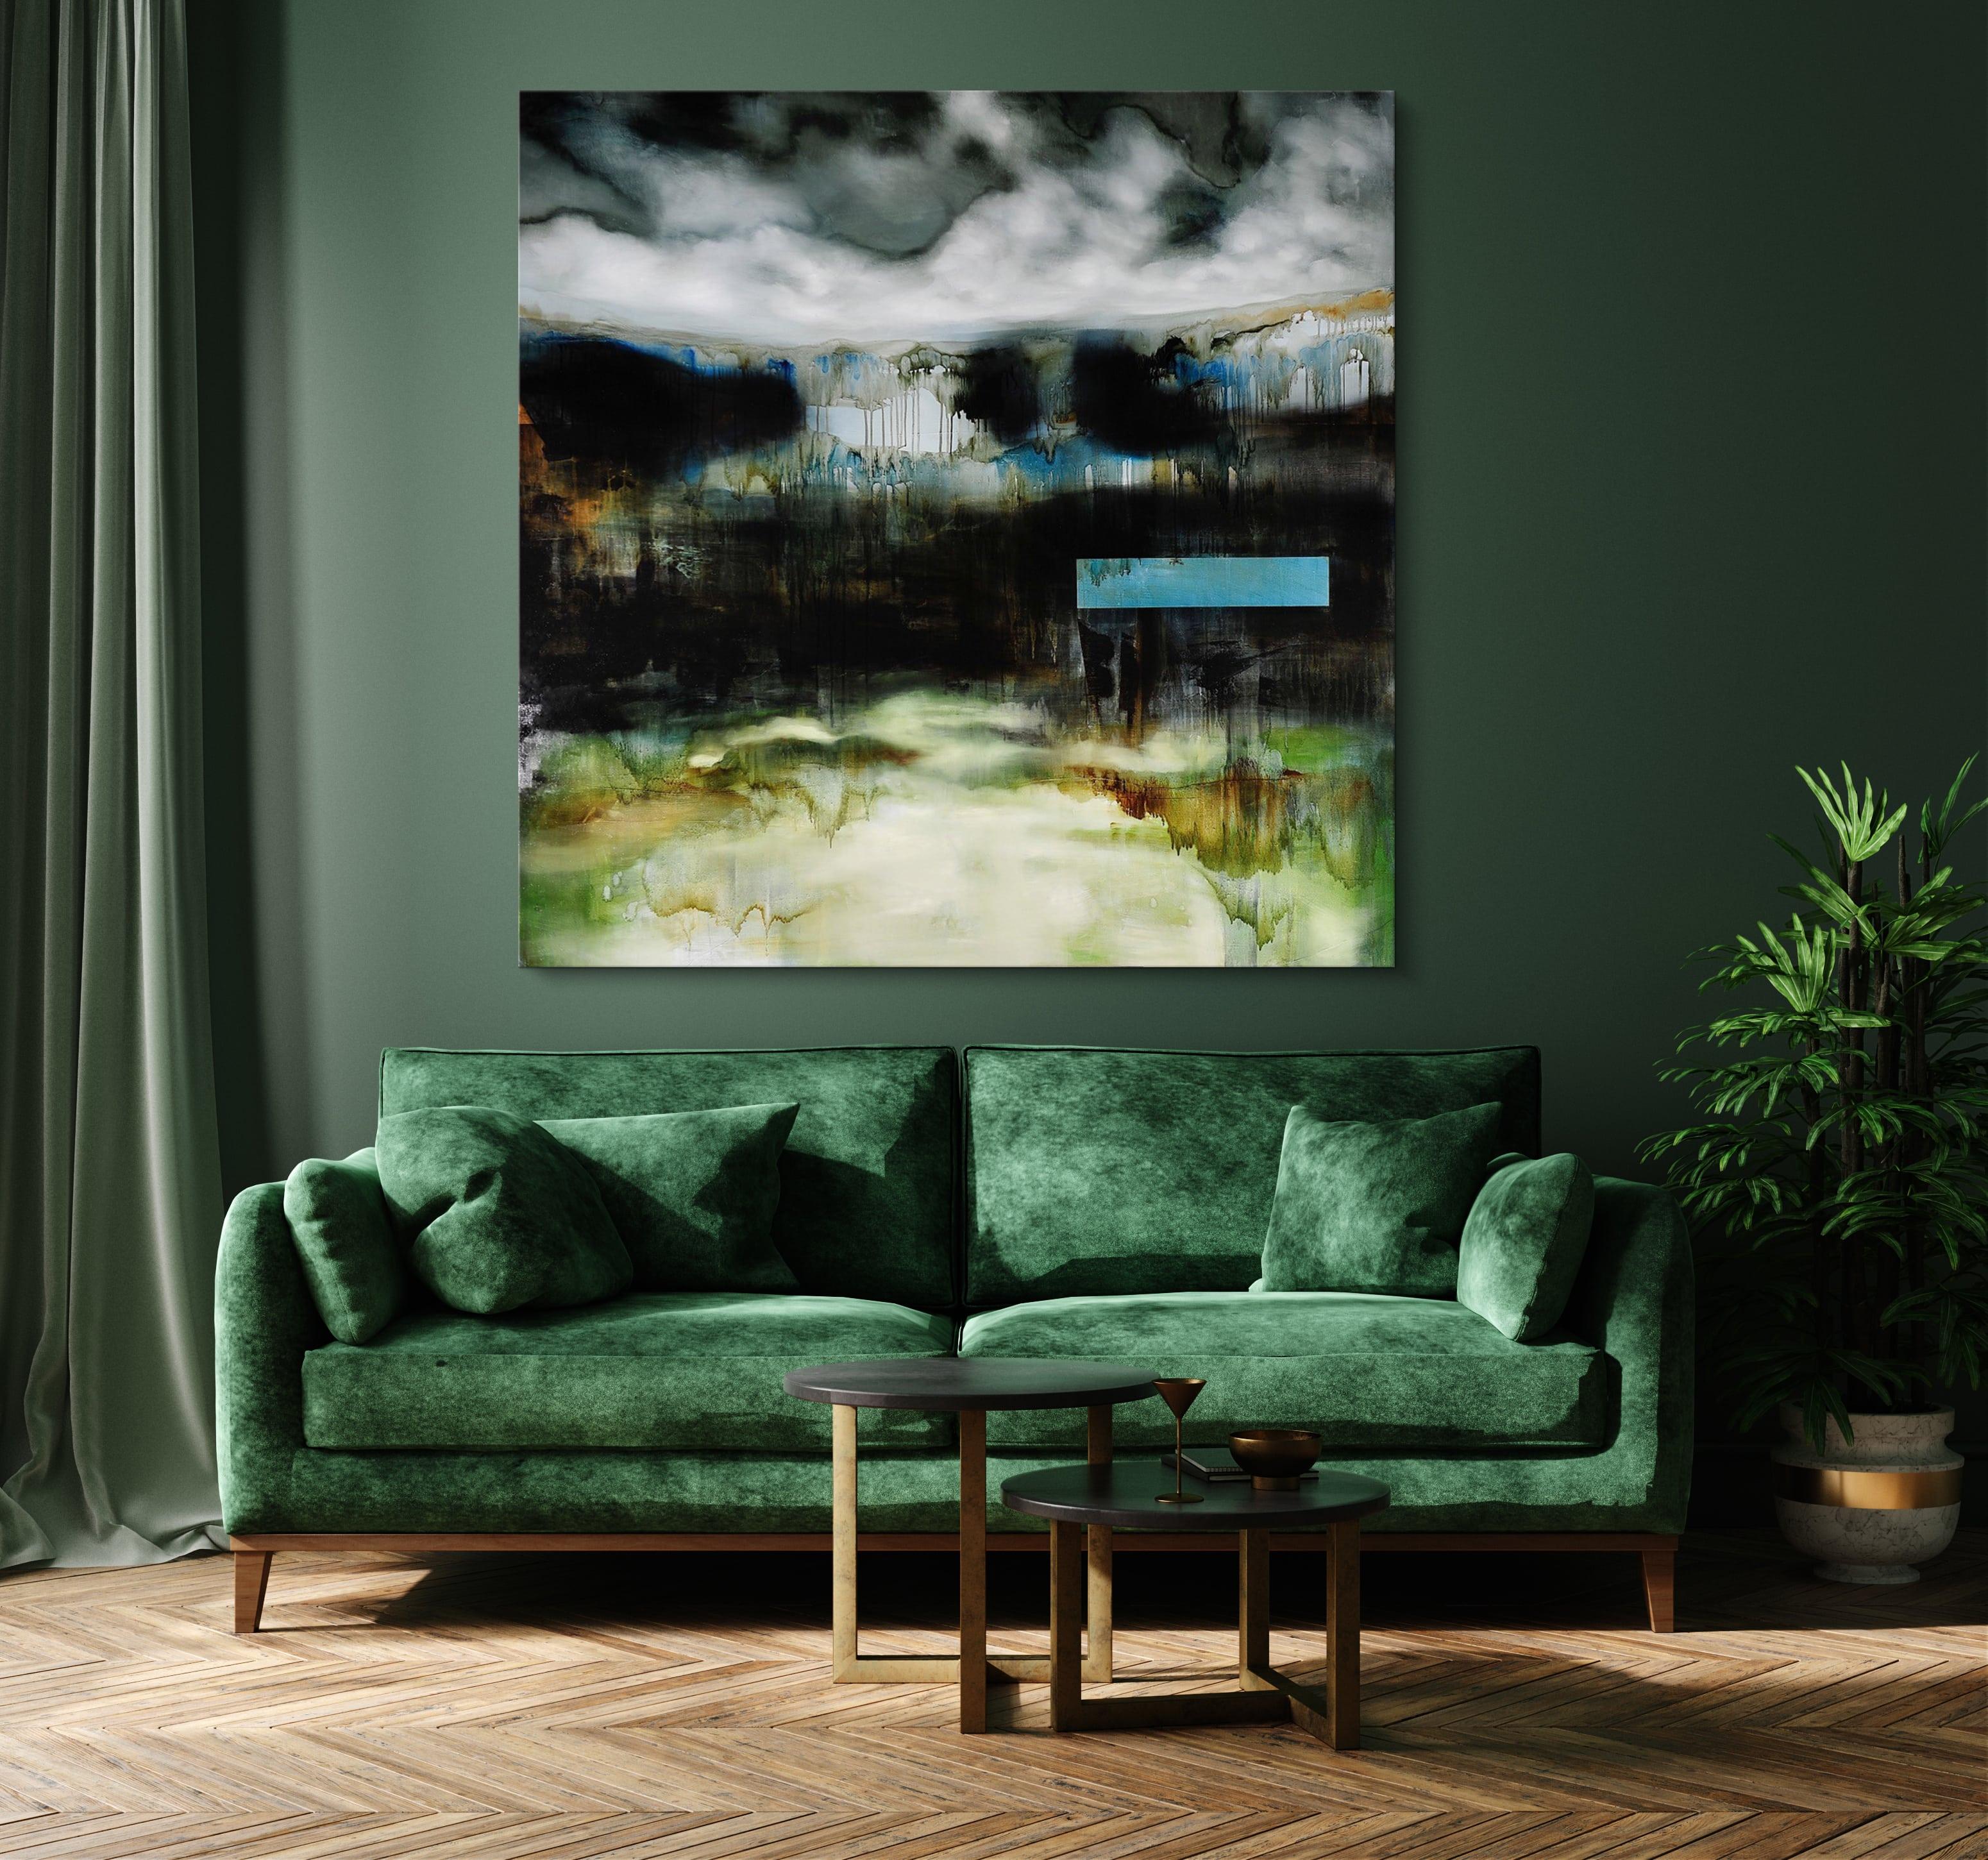 Unchartered I (2020), by contemporary artist Joachim van der Vlugt. Oil on canvas, 140 cm × 140 cm.
Challenging the boundaries between figuration and abstraction, the artist creates compositions that evoke natural landscapes under often cloudy